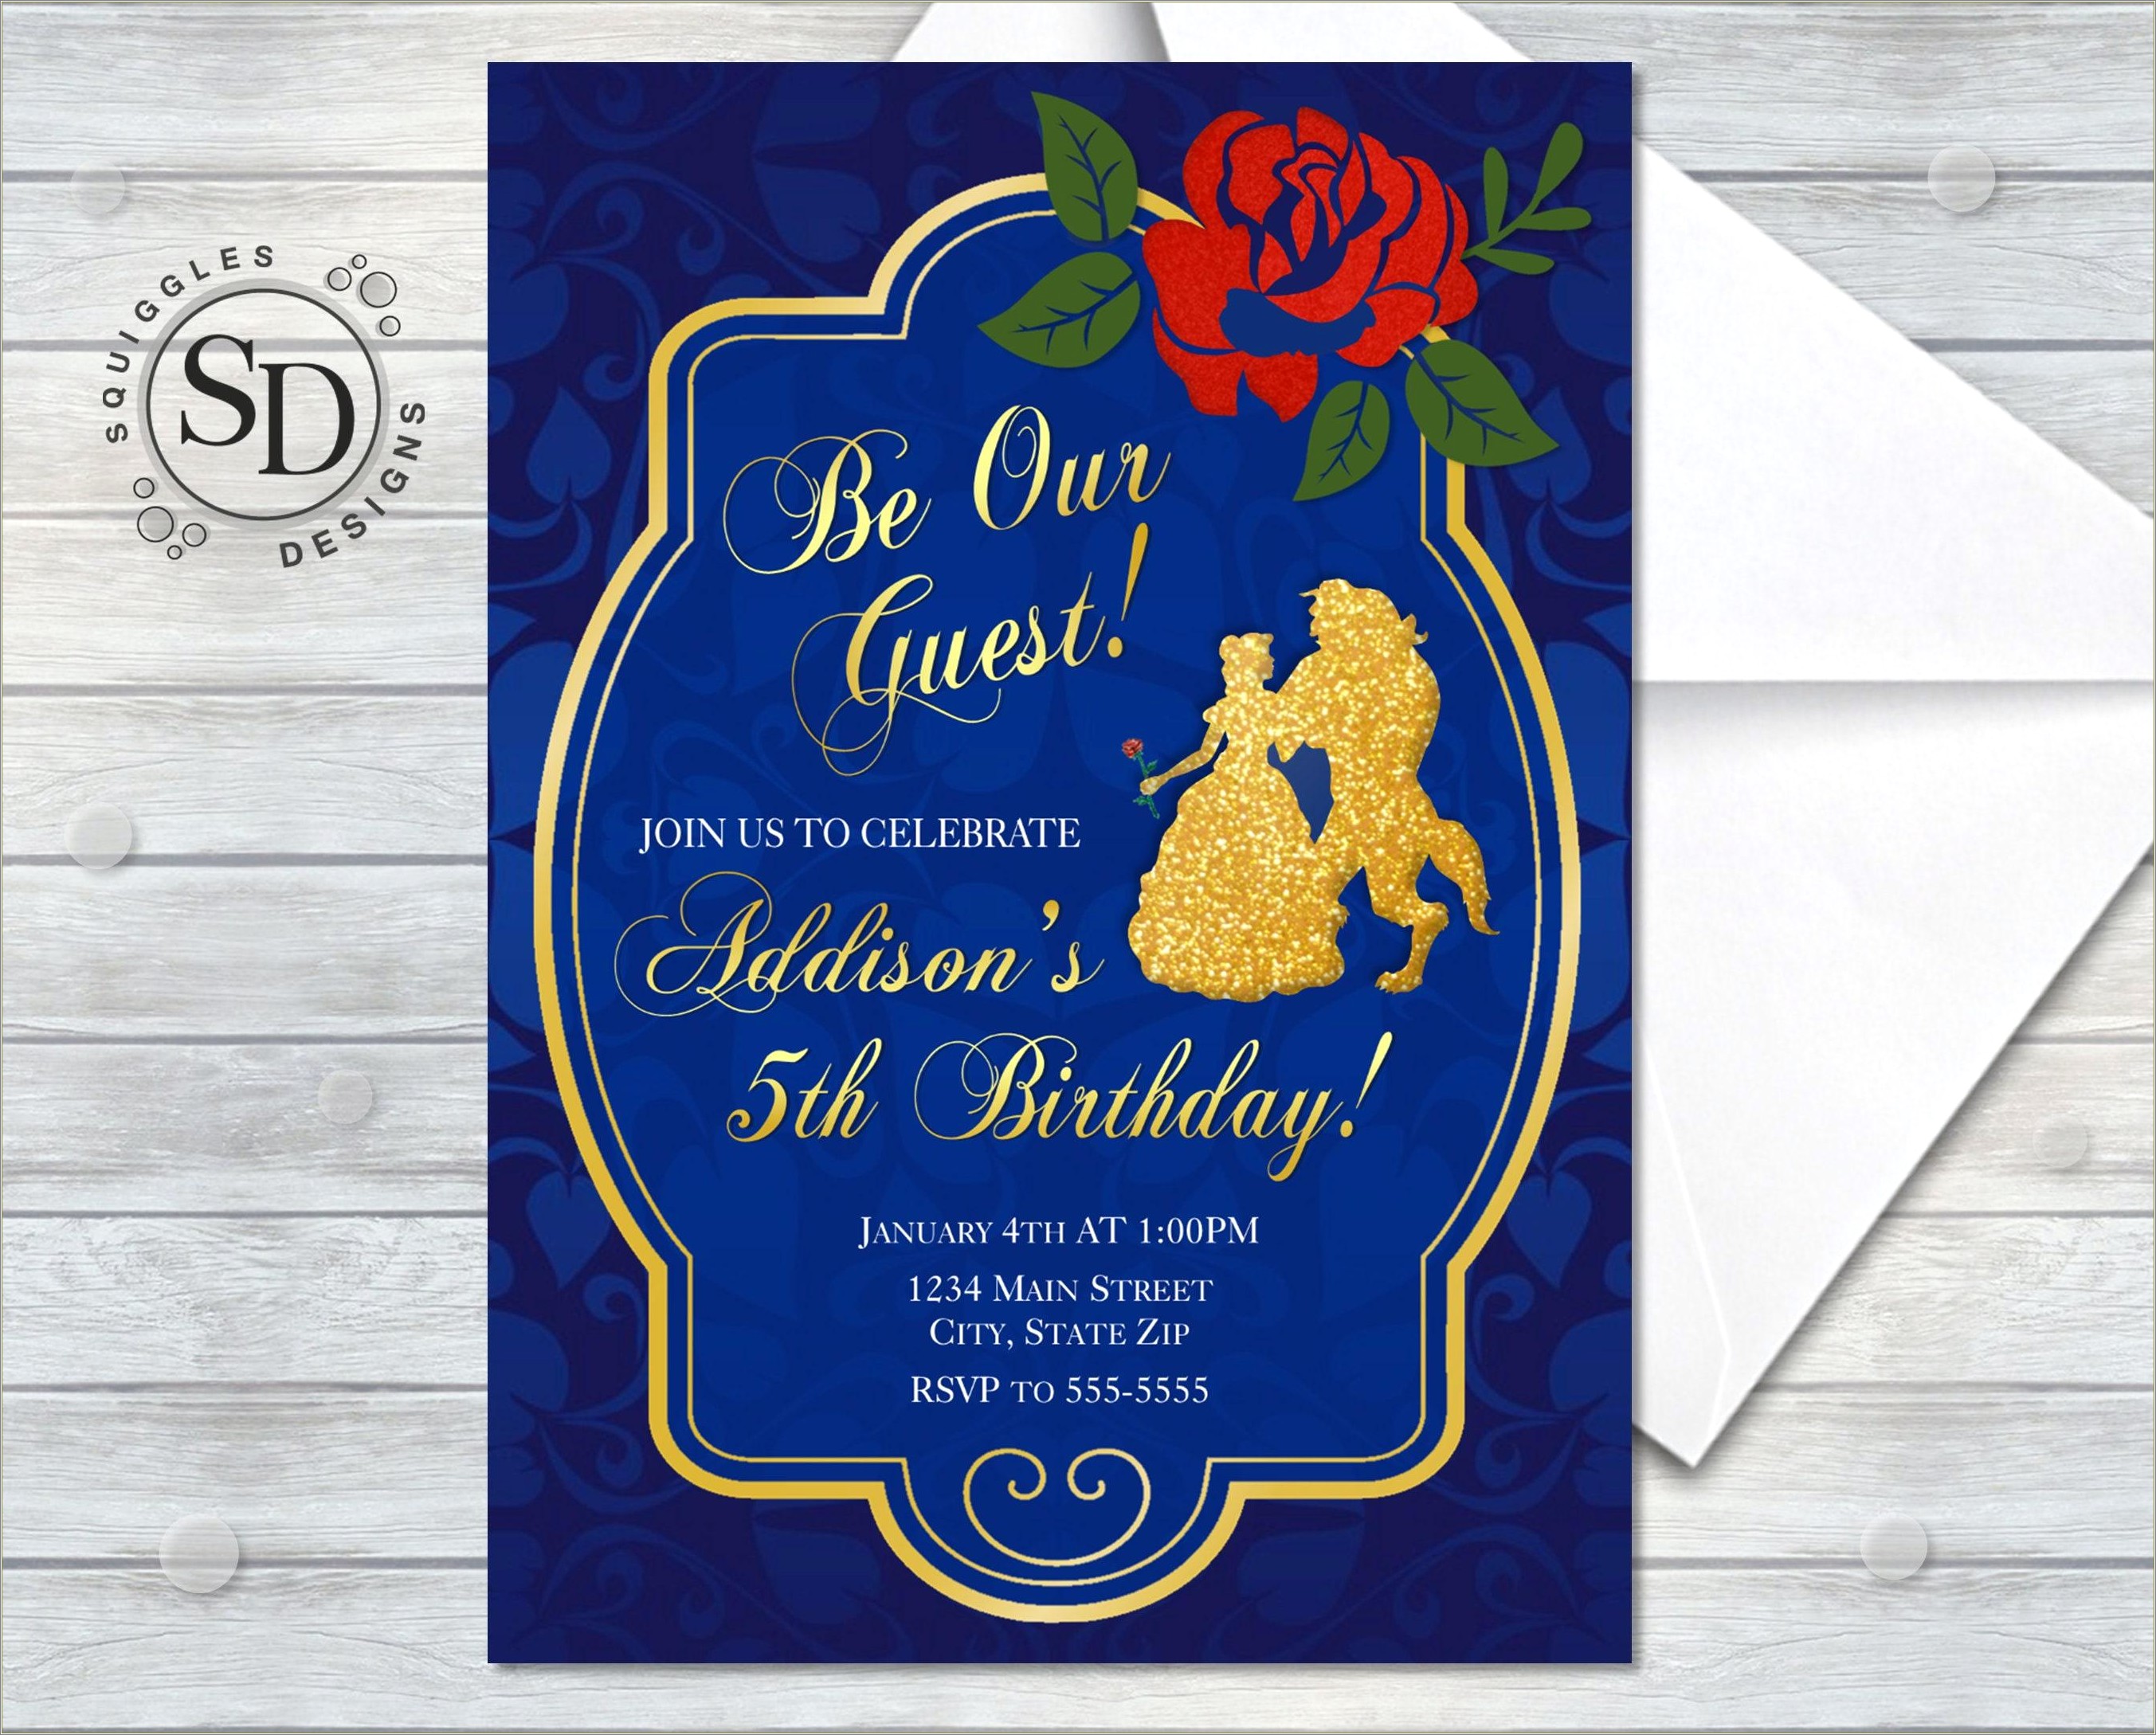 Beauty And The Beast Birthday Invitation Template Free